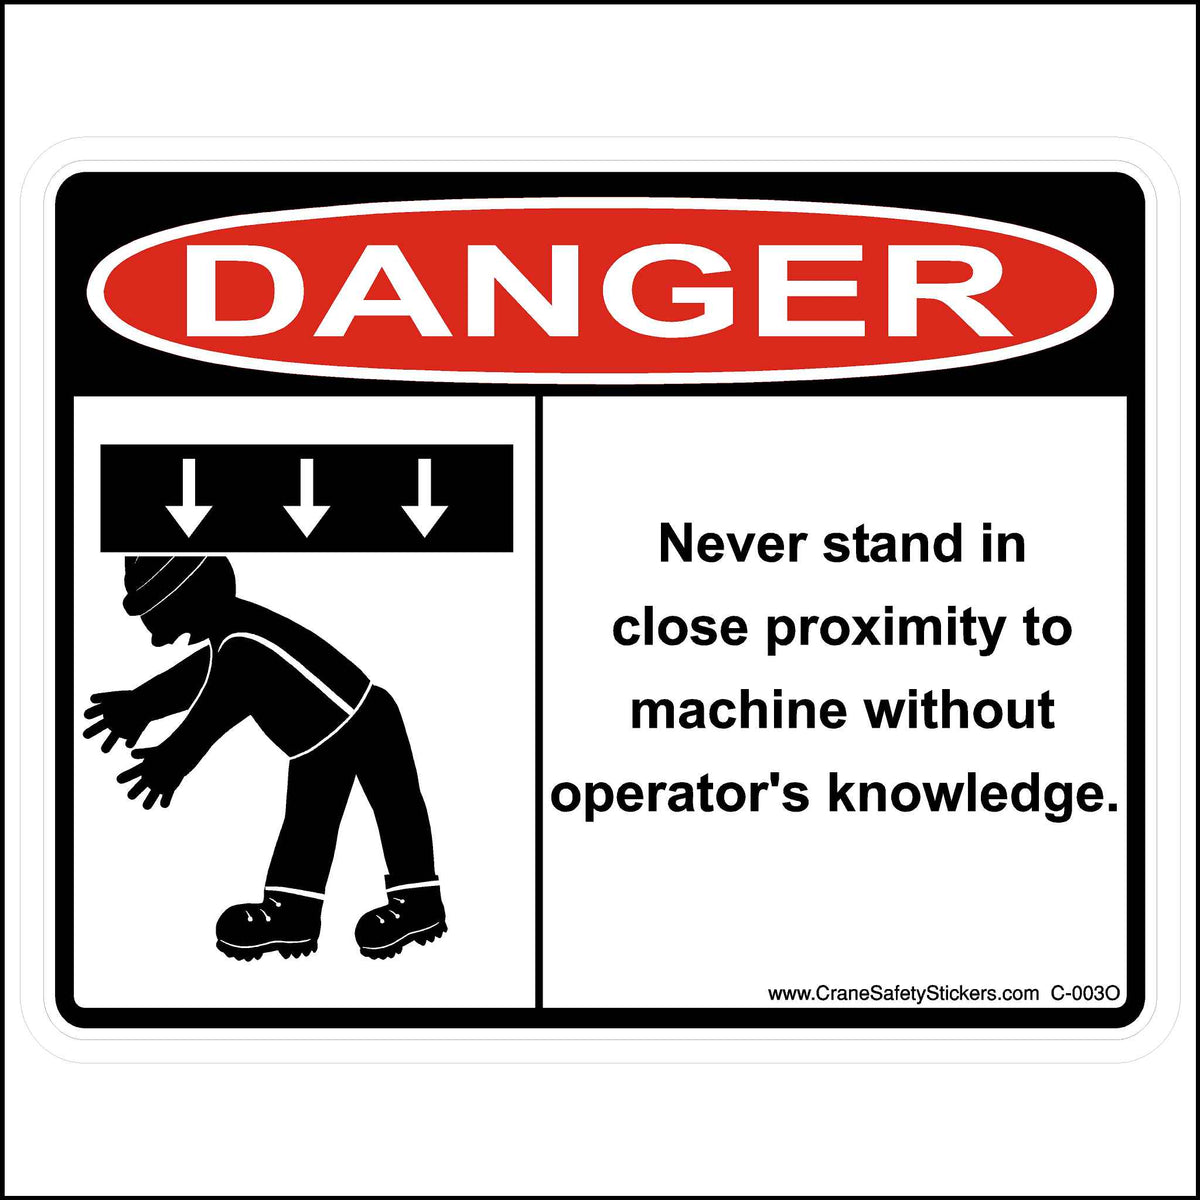 OSHA Crane Safety Sticker. Danger, never stand in close proximity to machine without operator&#39;s knowledge decal..